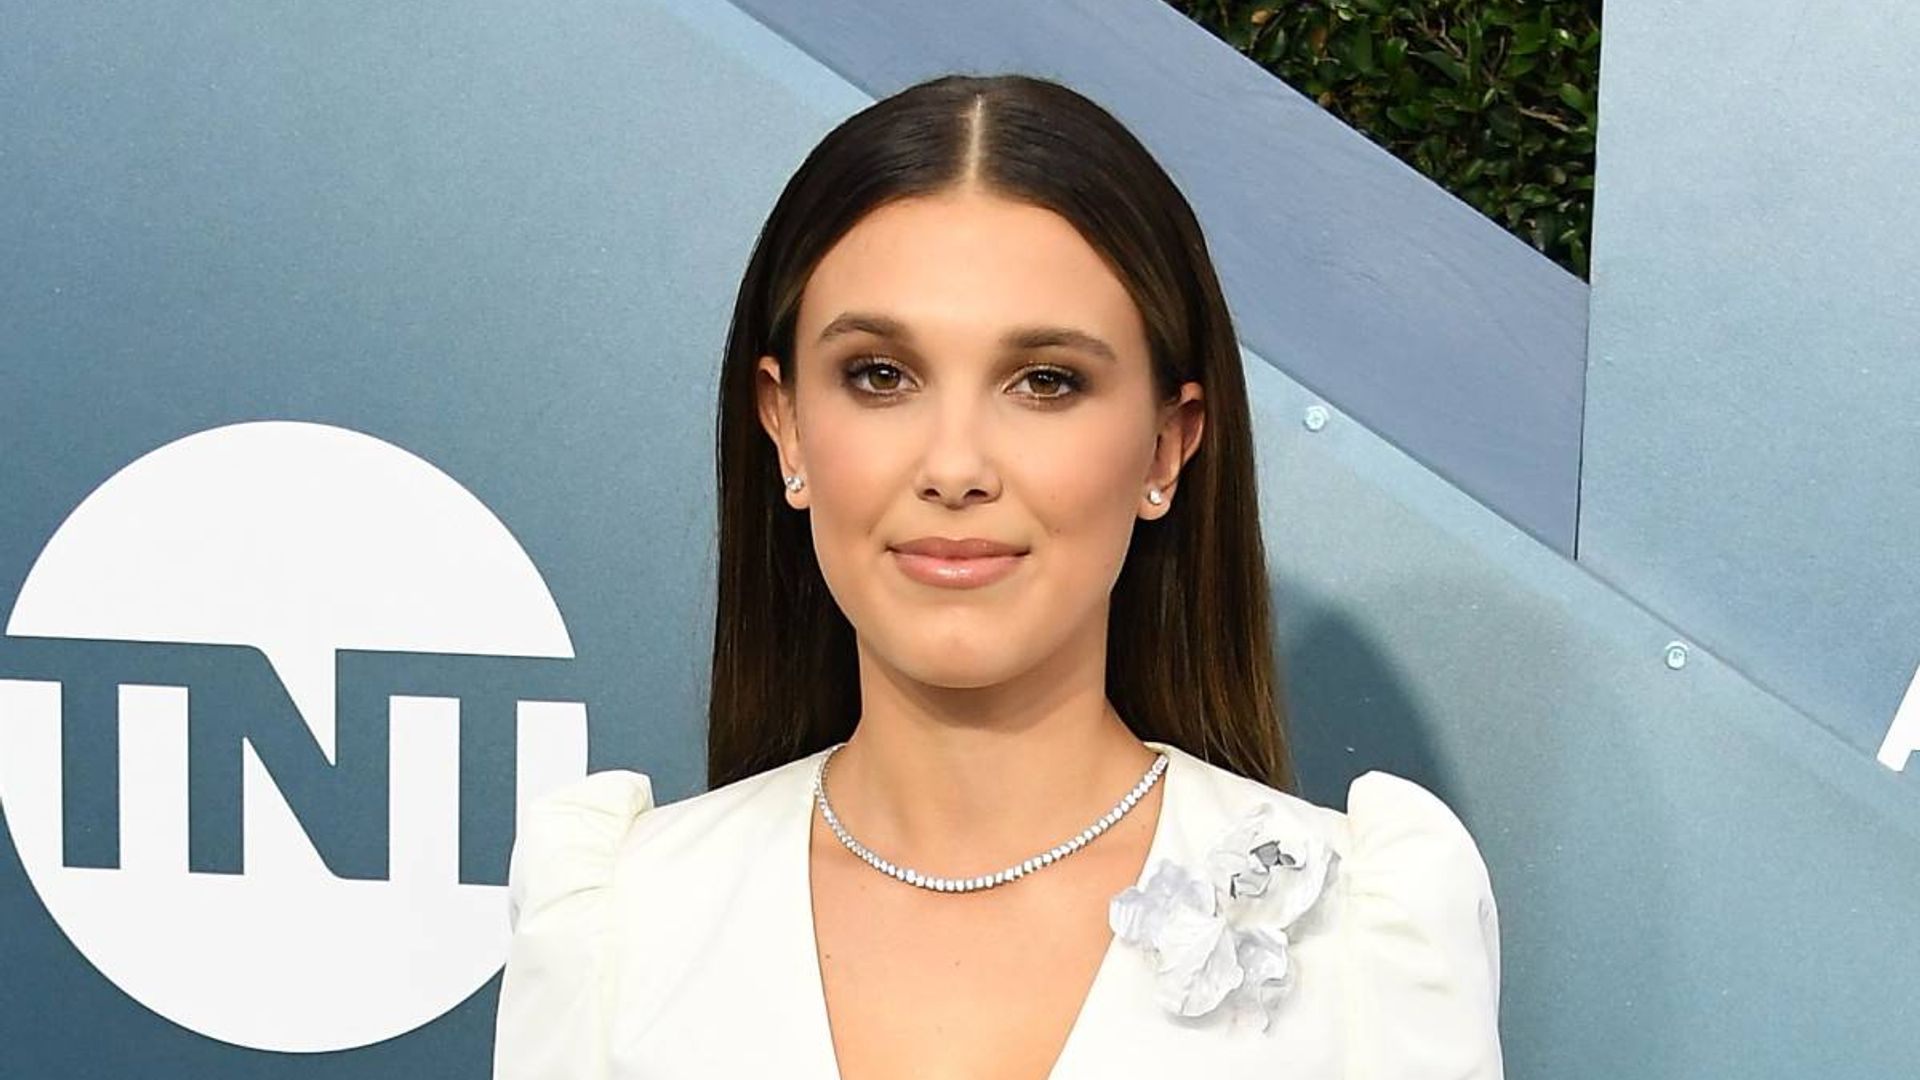 Millie Bobby Brown went makeup-free for her latest Instagram post